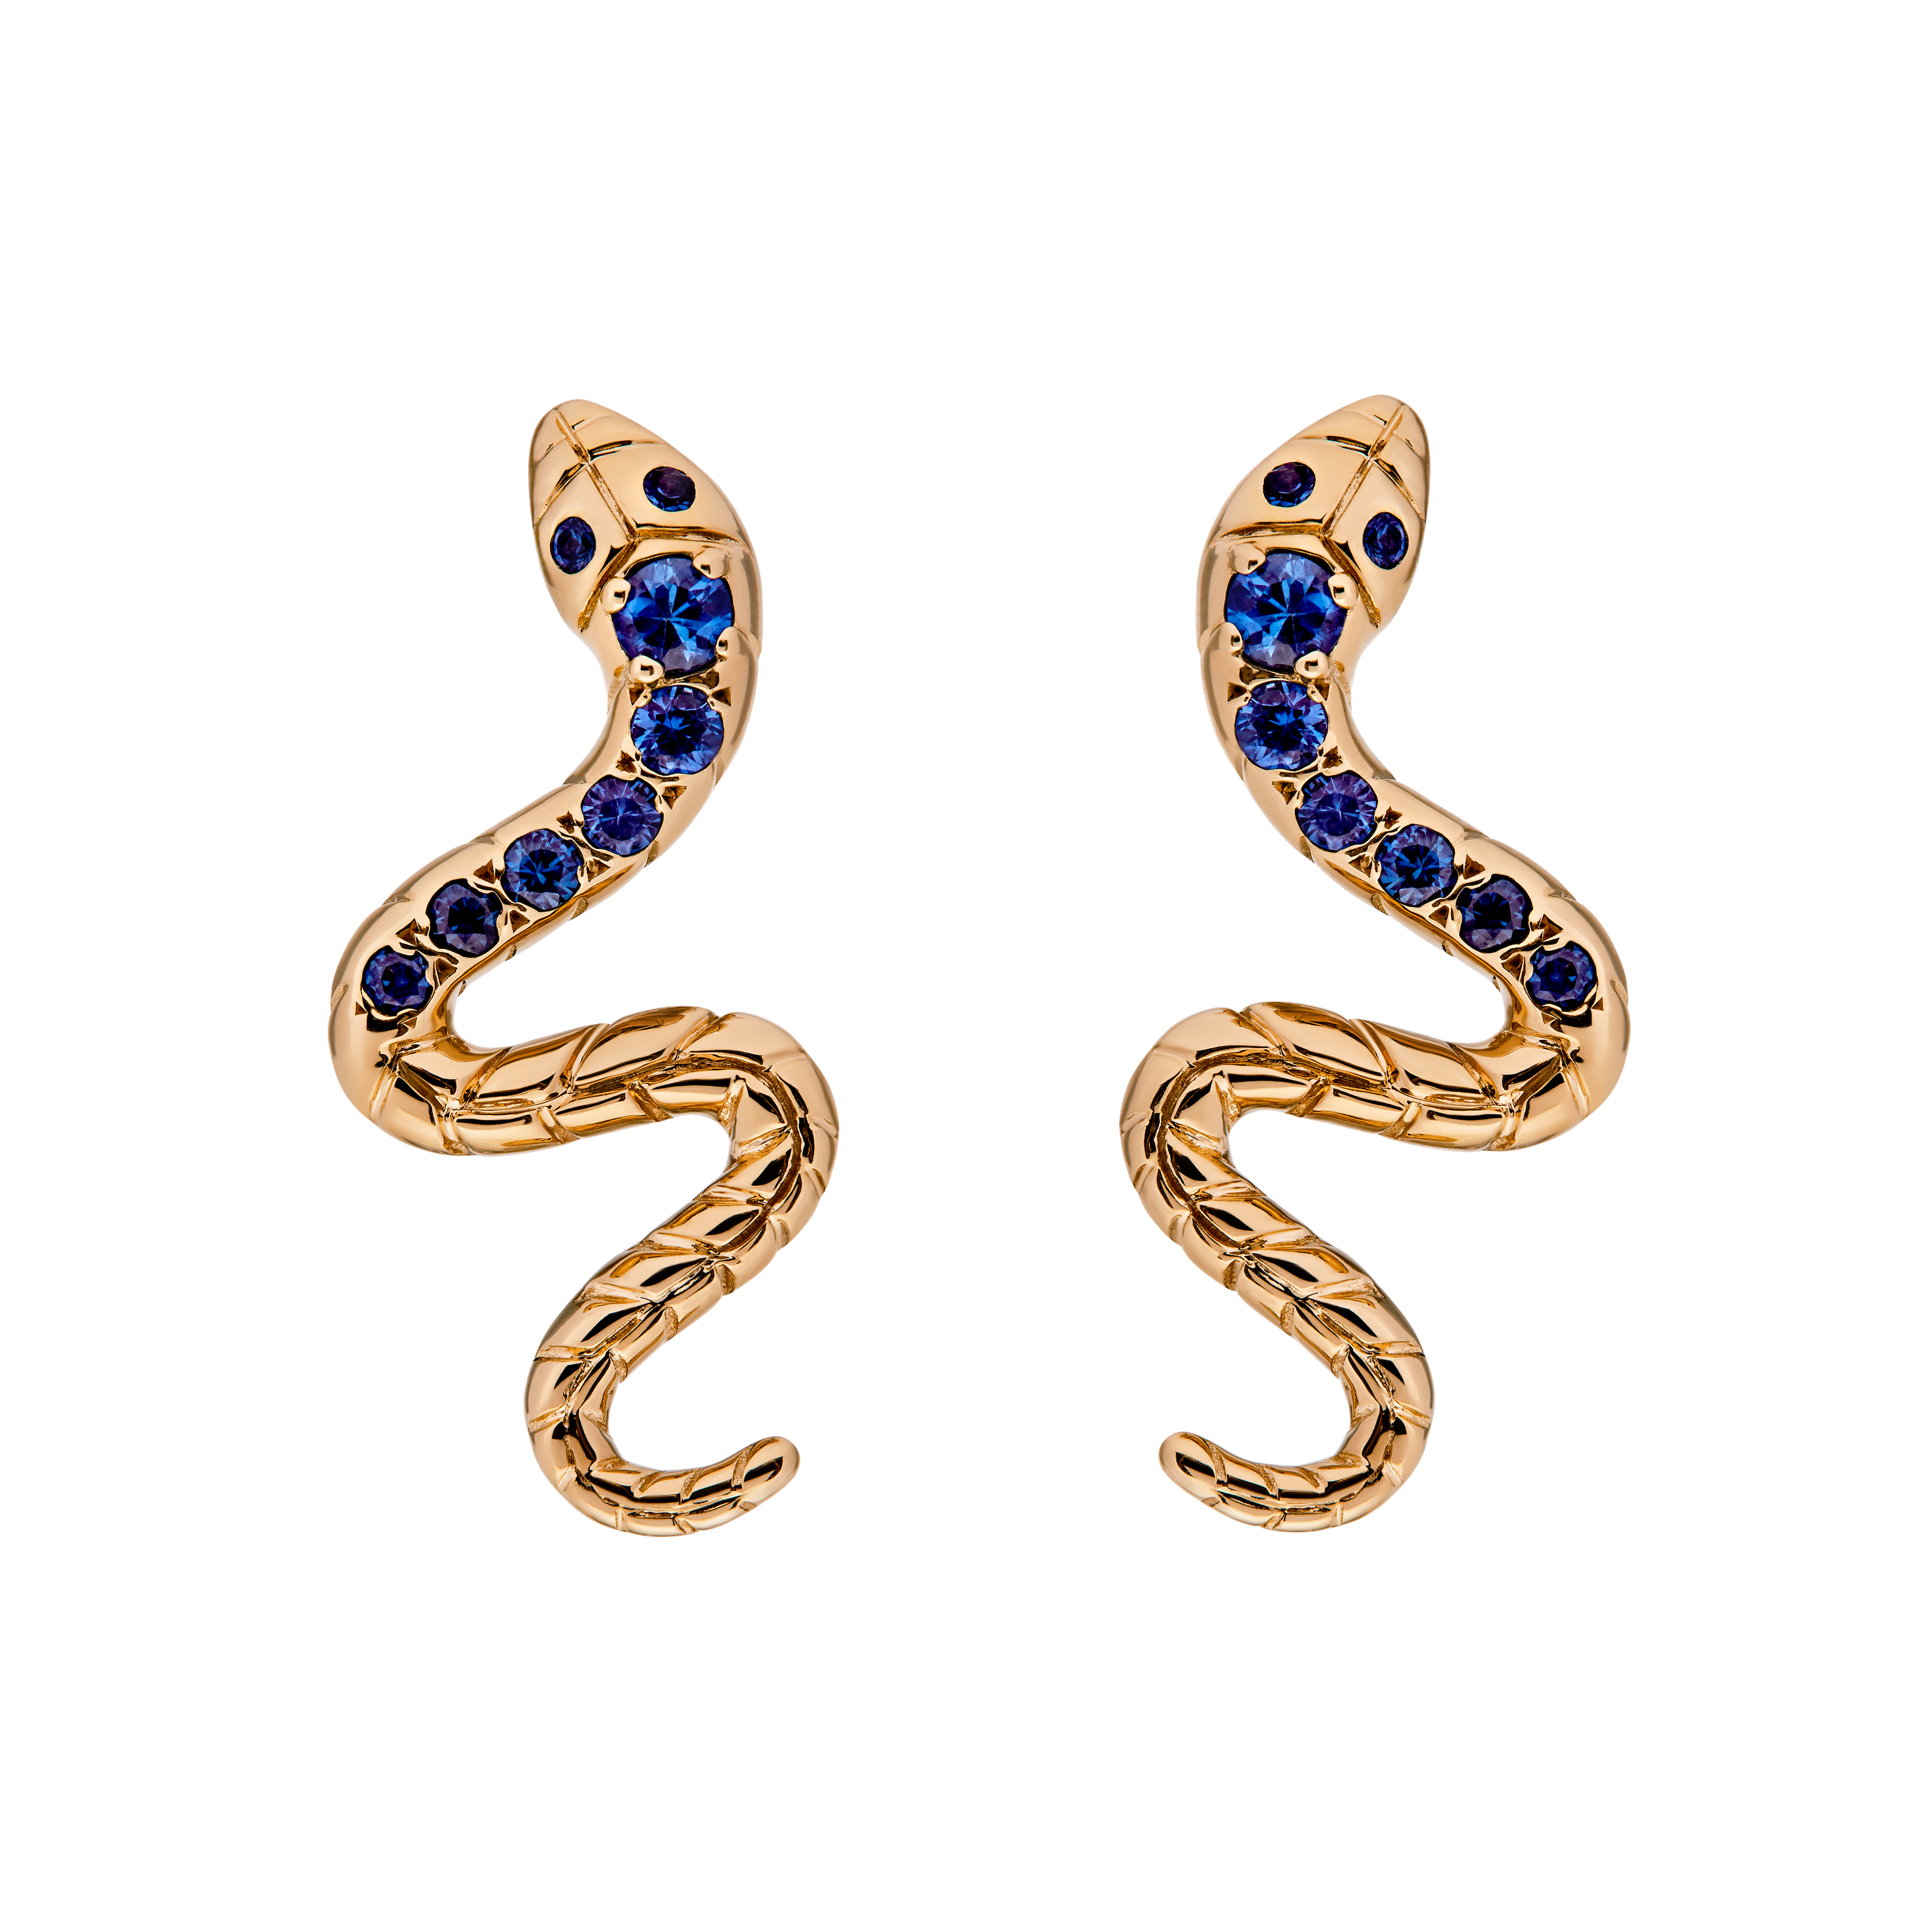 9ct Yellow Gold Snake Earrings Set with Sapphire